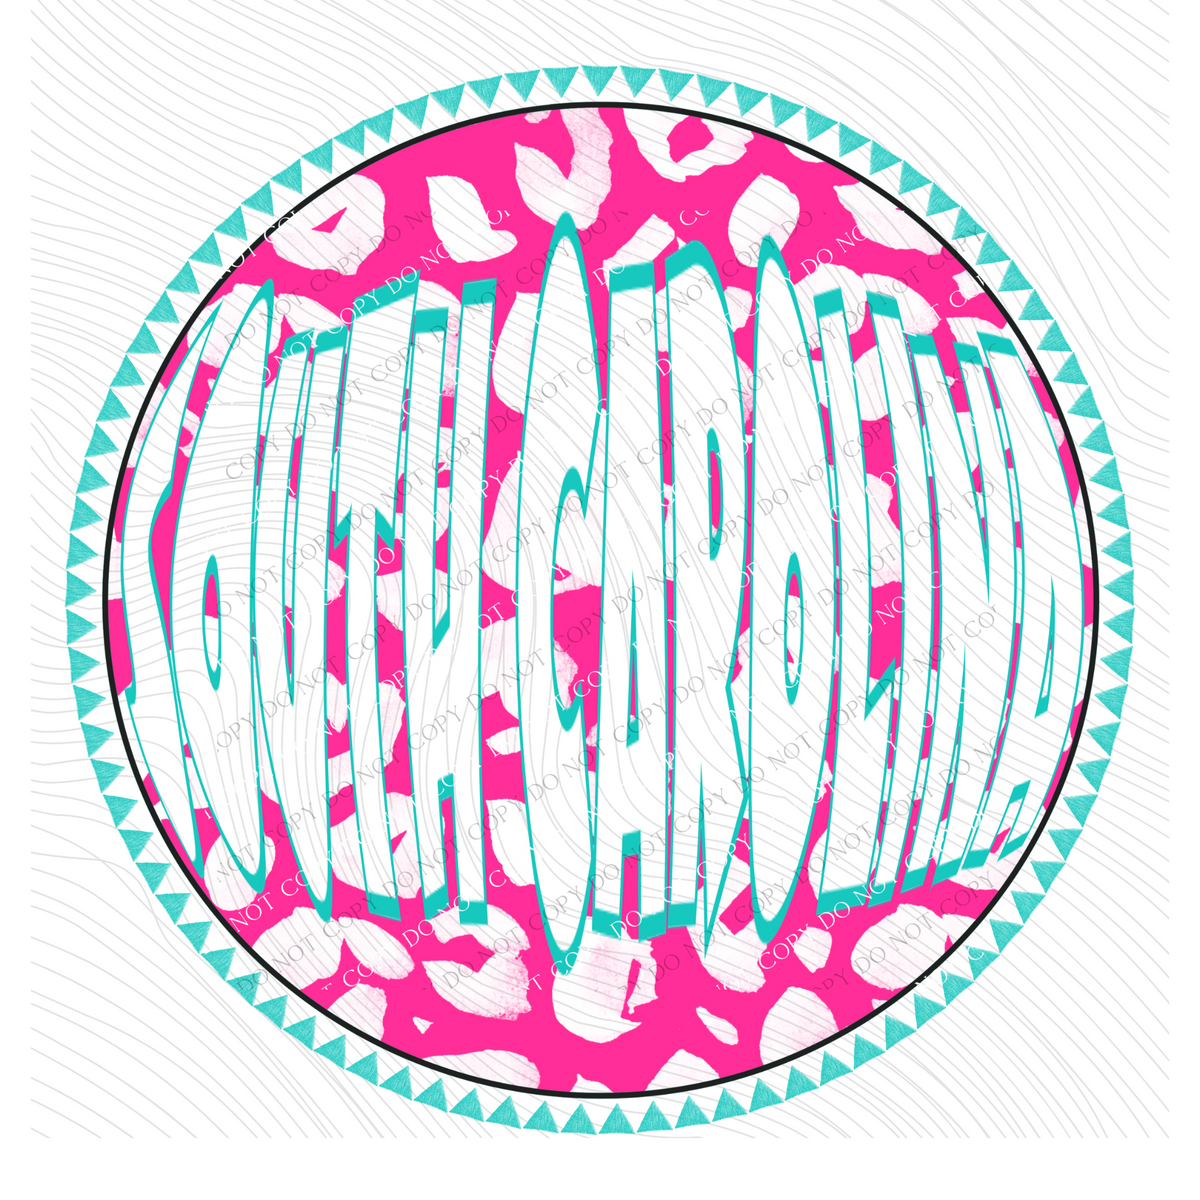 South Carolina Groovy Leopard Shadow & Non Shadow (both included) Cutout in Pink & Teal Digital Design, PNG